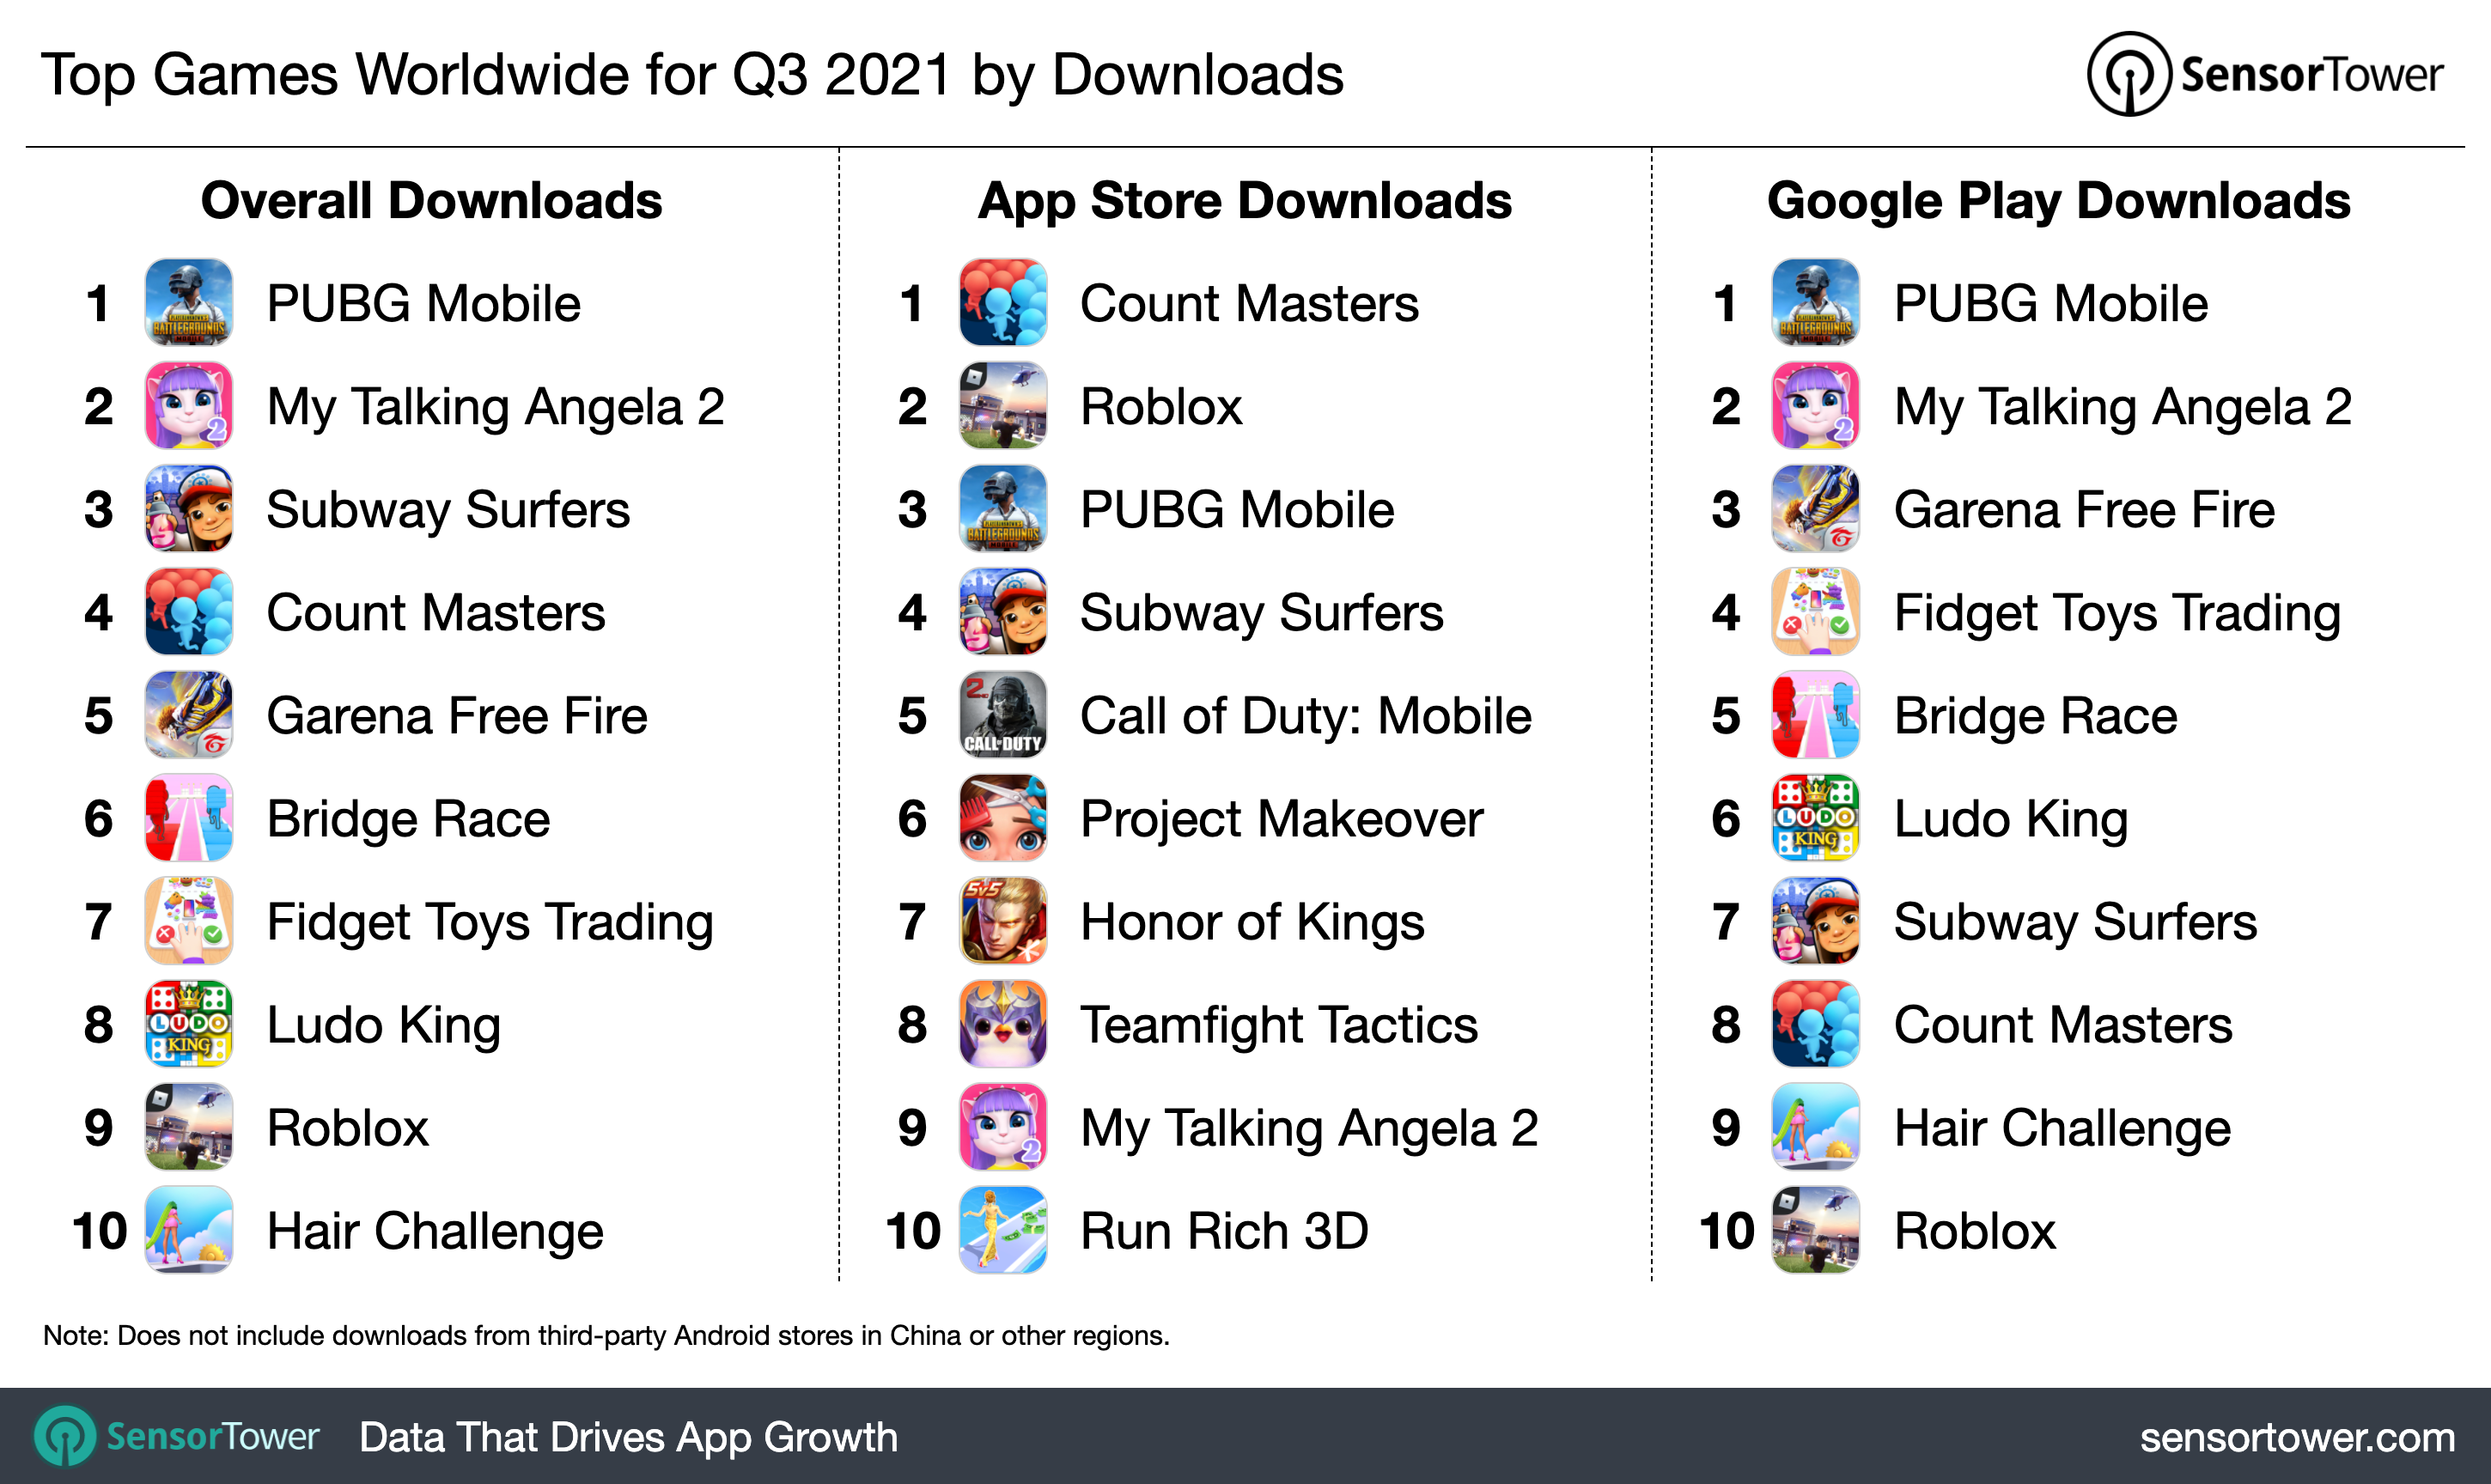 PUBG Mobile was the top downloaded game in 3Q21, followed by My Talking Angela 2 and Subway Surfers.